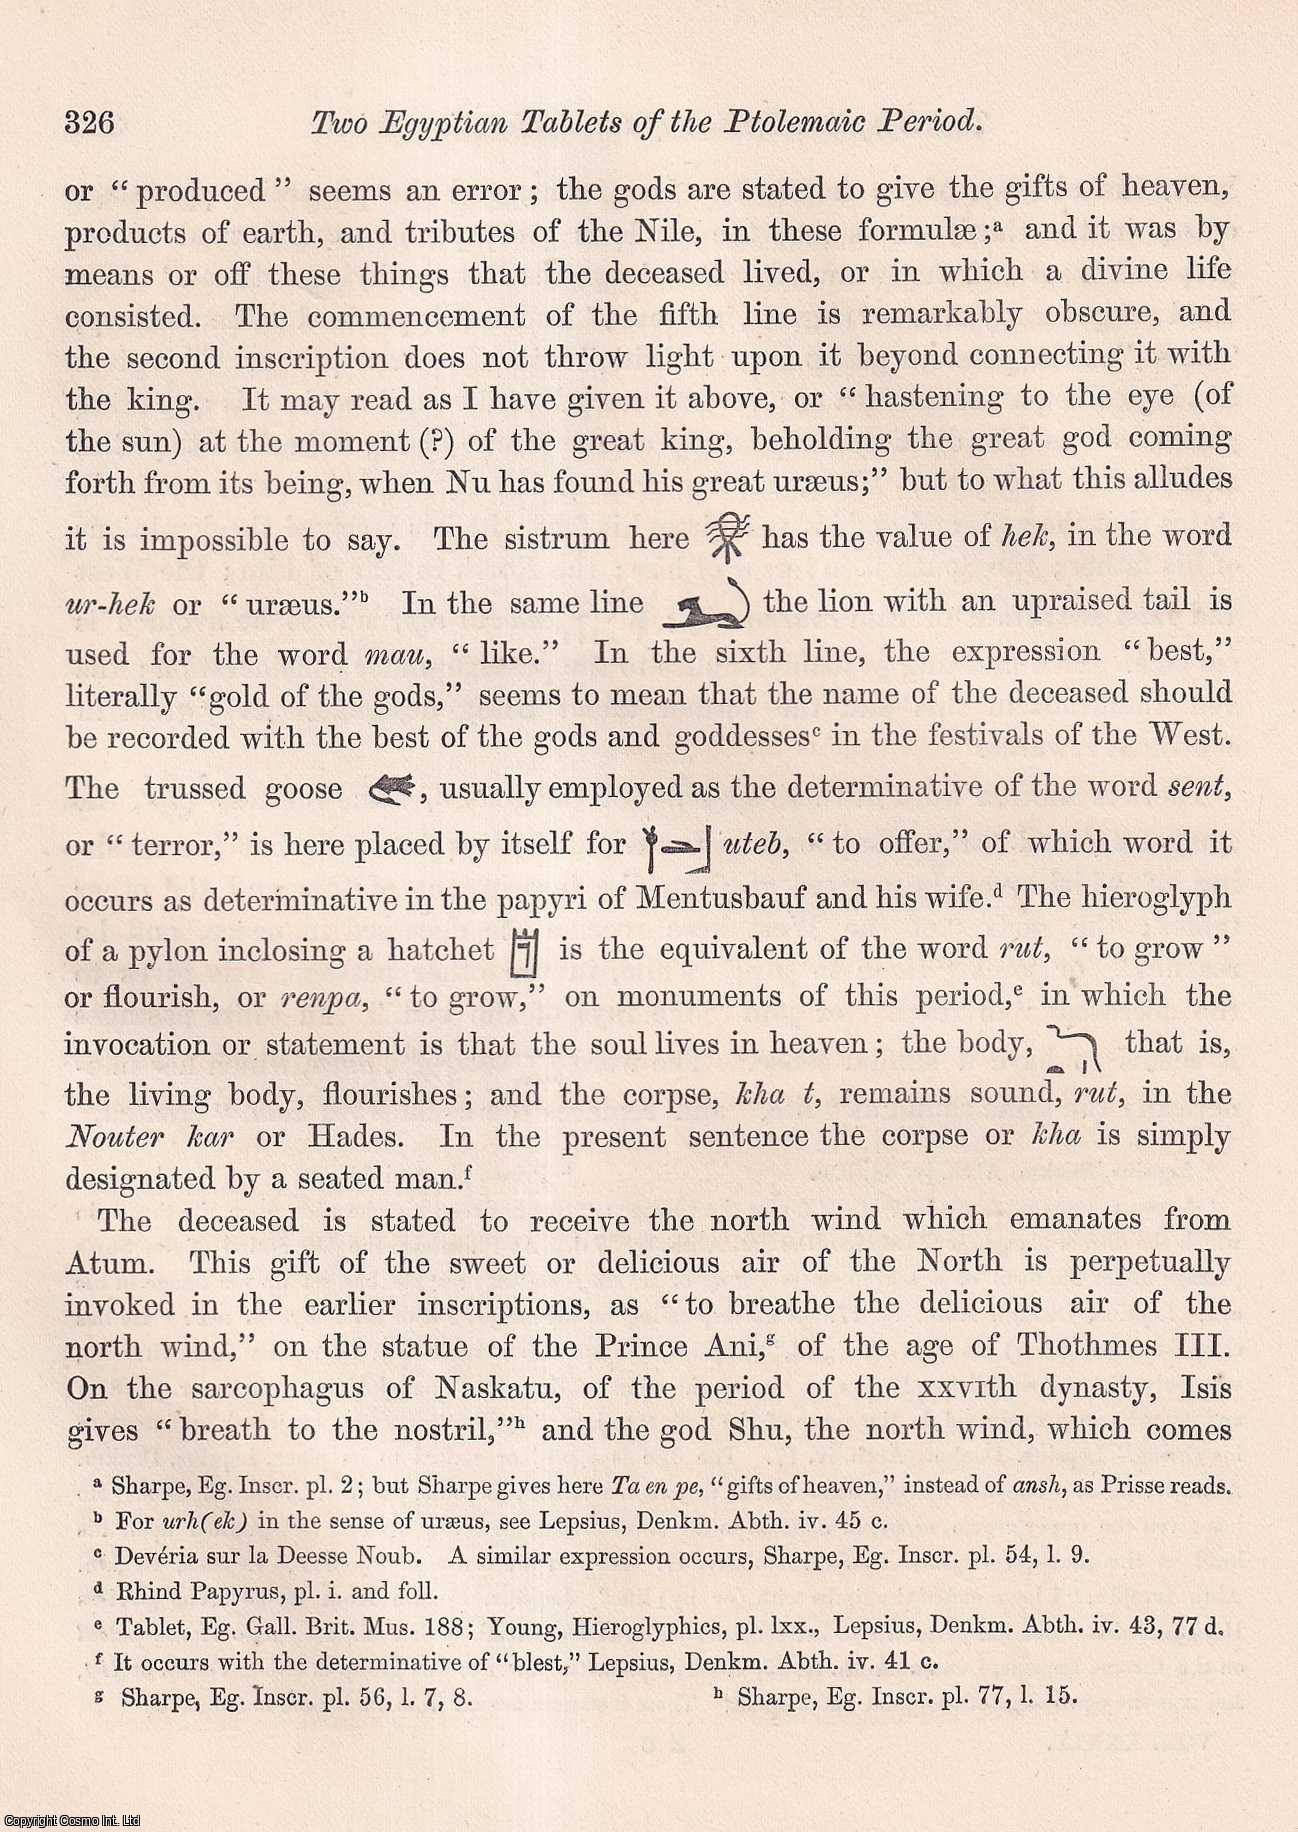 Samuel Birch Esq., LL.D., F.S.A. - On Two Egyptian Tablets of the Ptolemaic Period. An uncommon original article from the journal Archaeologia, 1863.